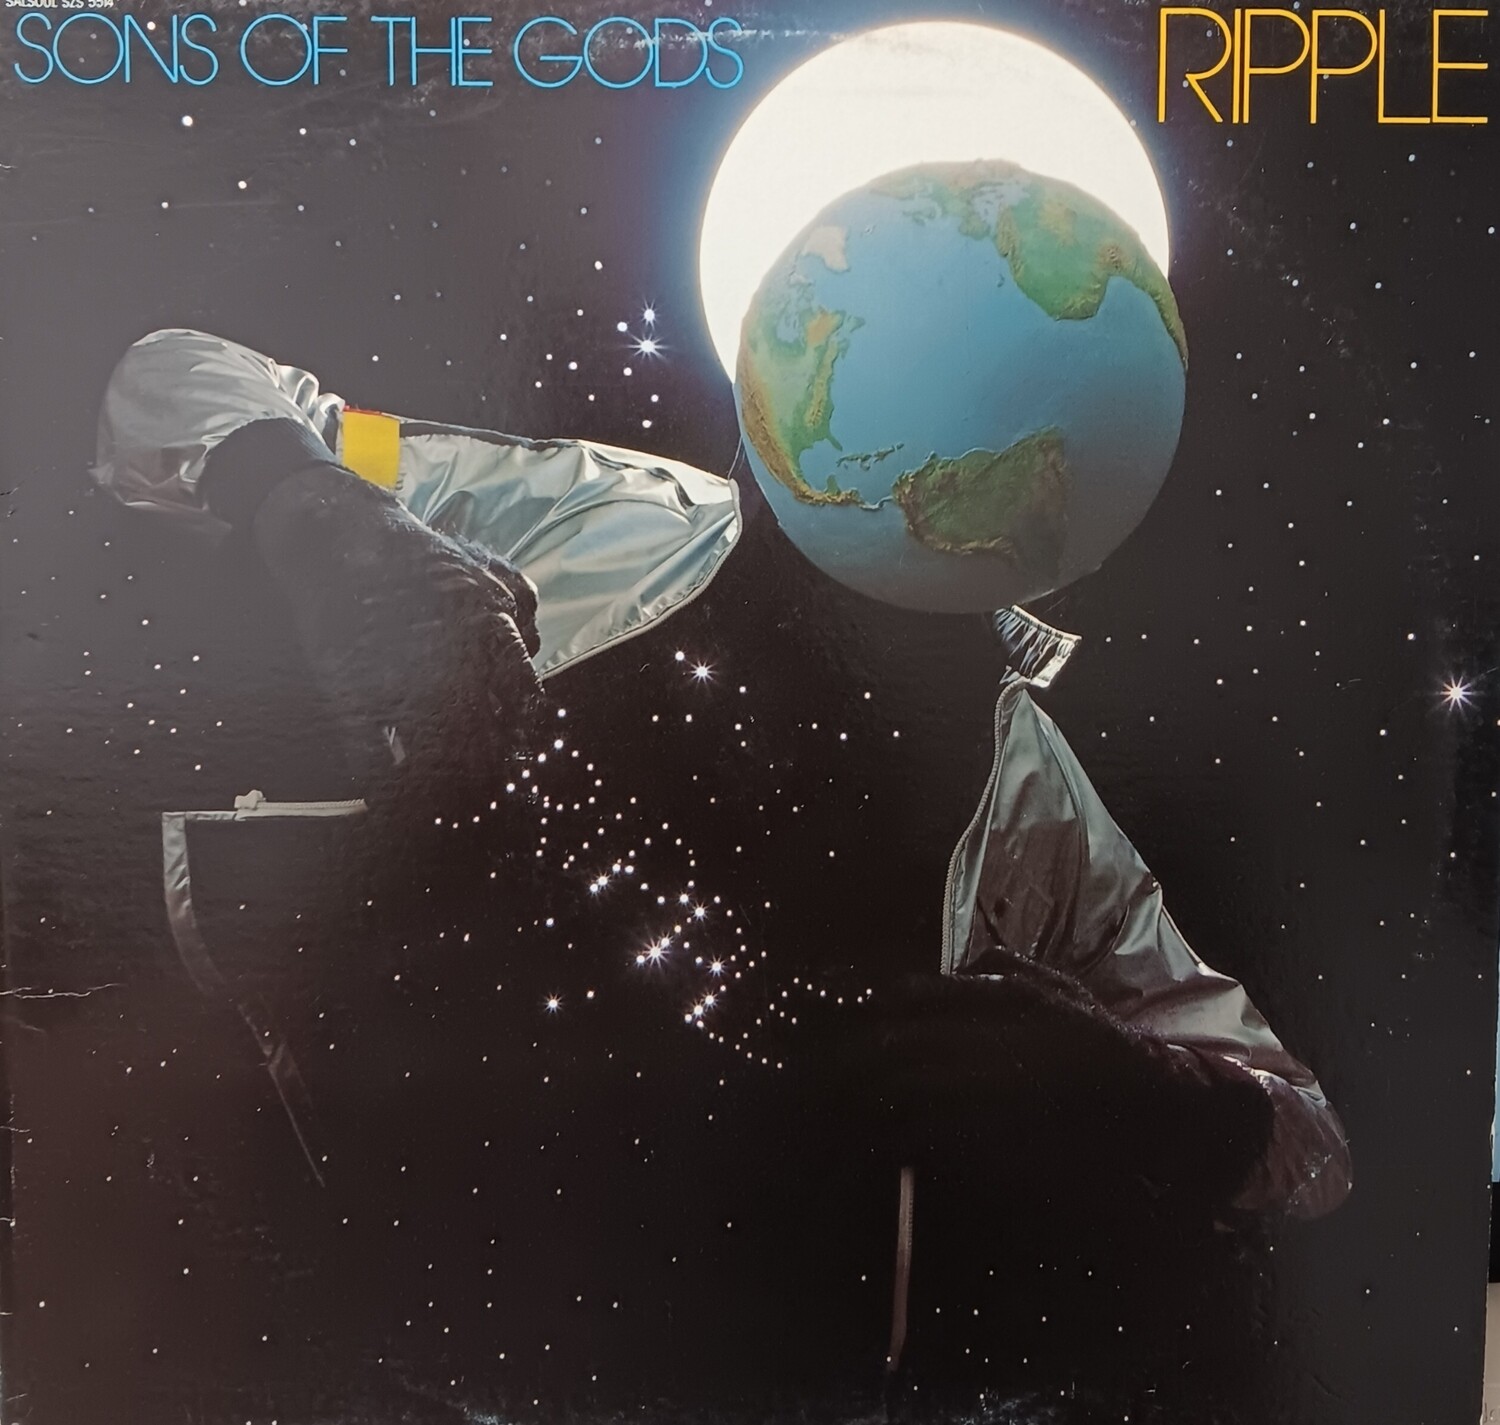 RIPPLE - Sons of the gods